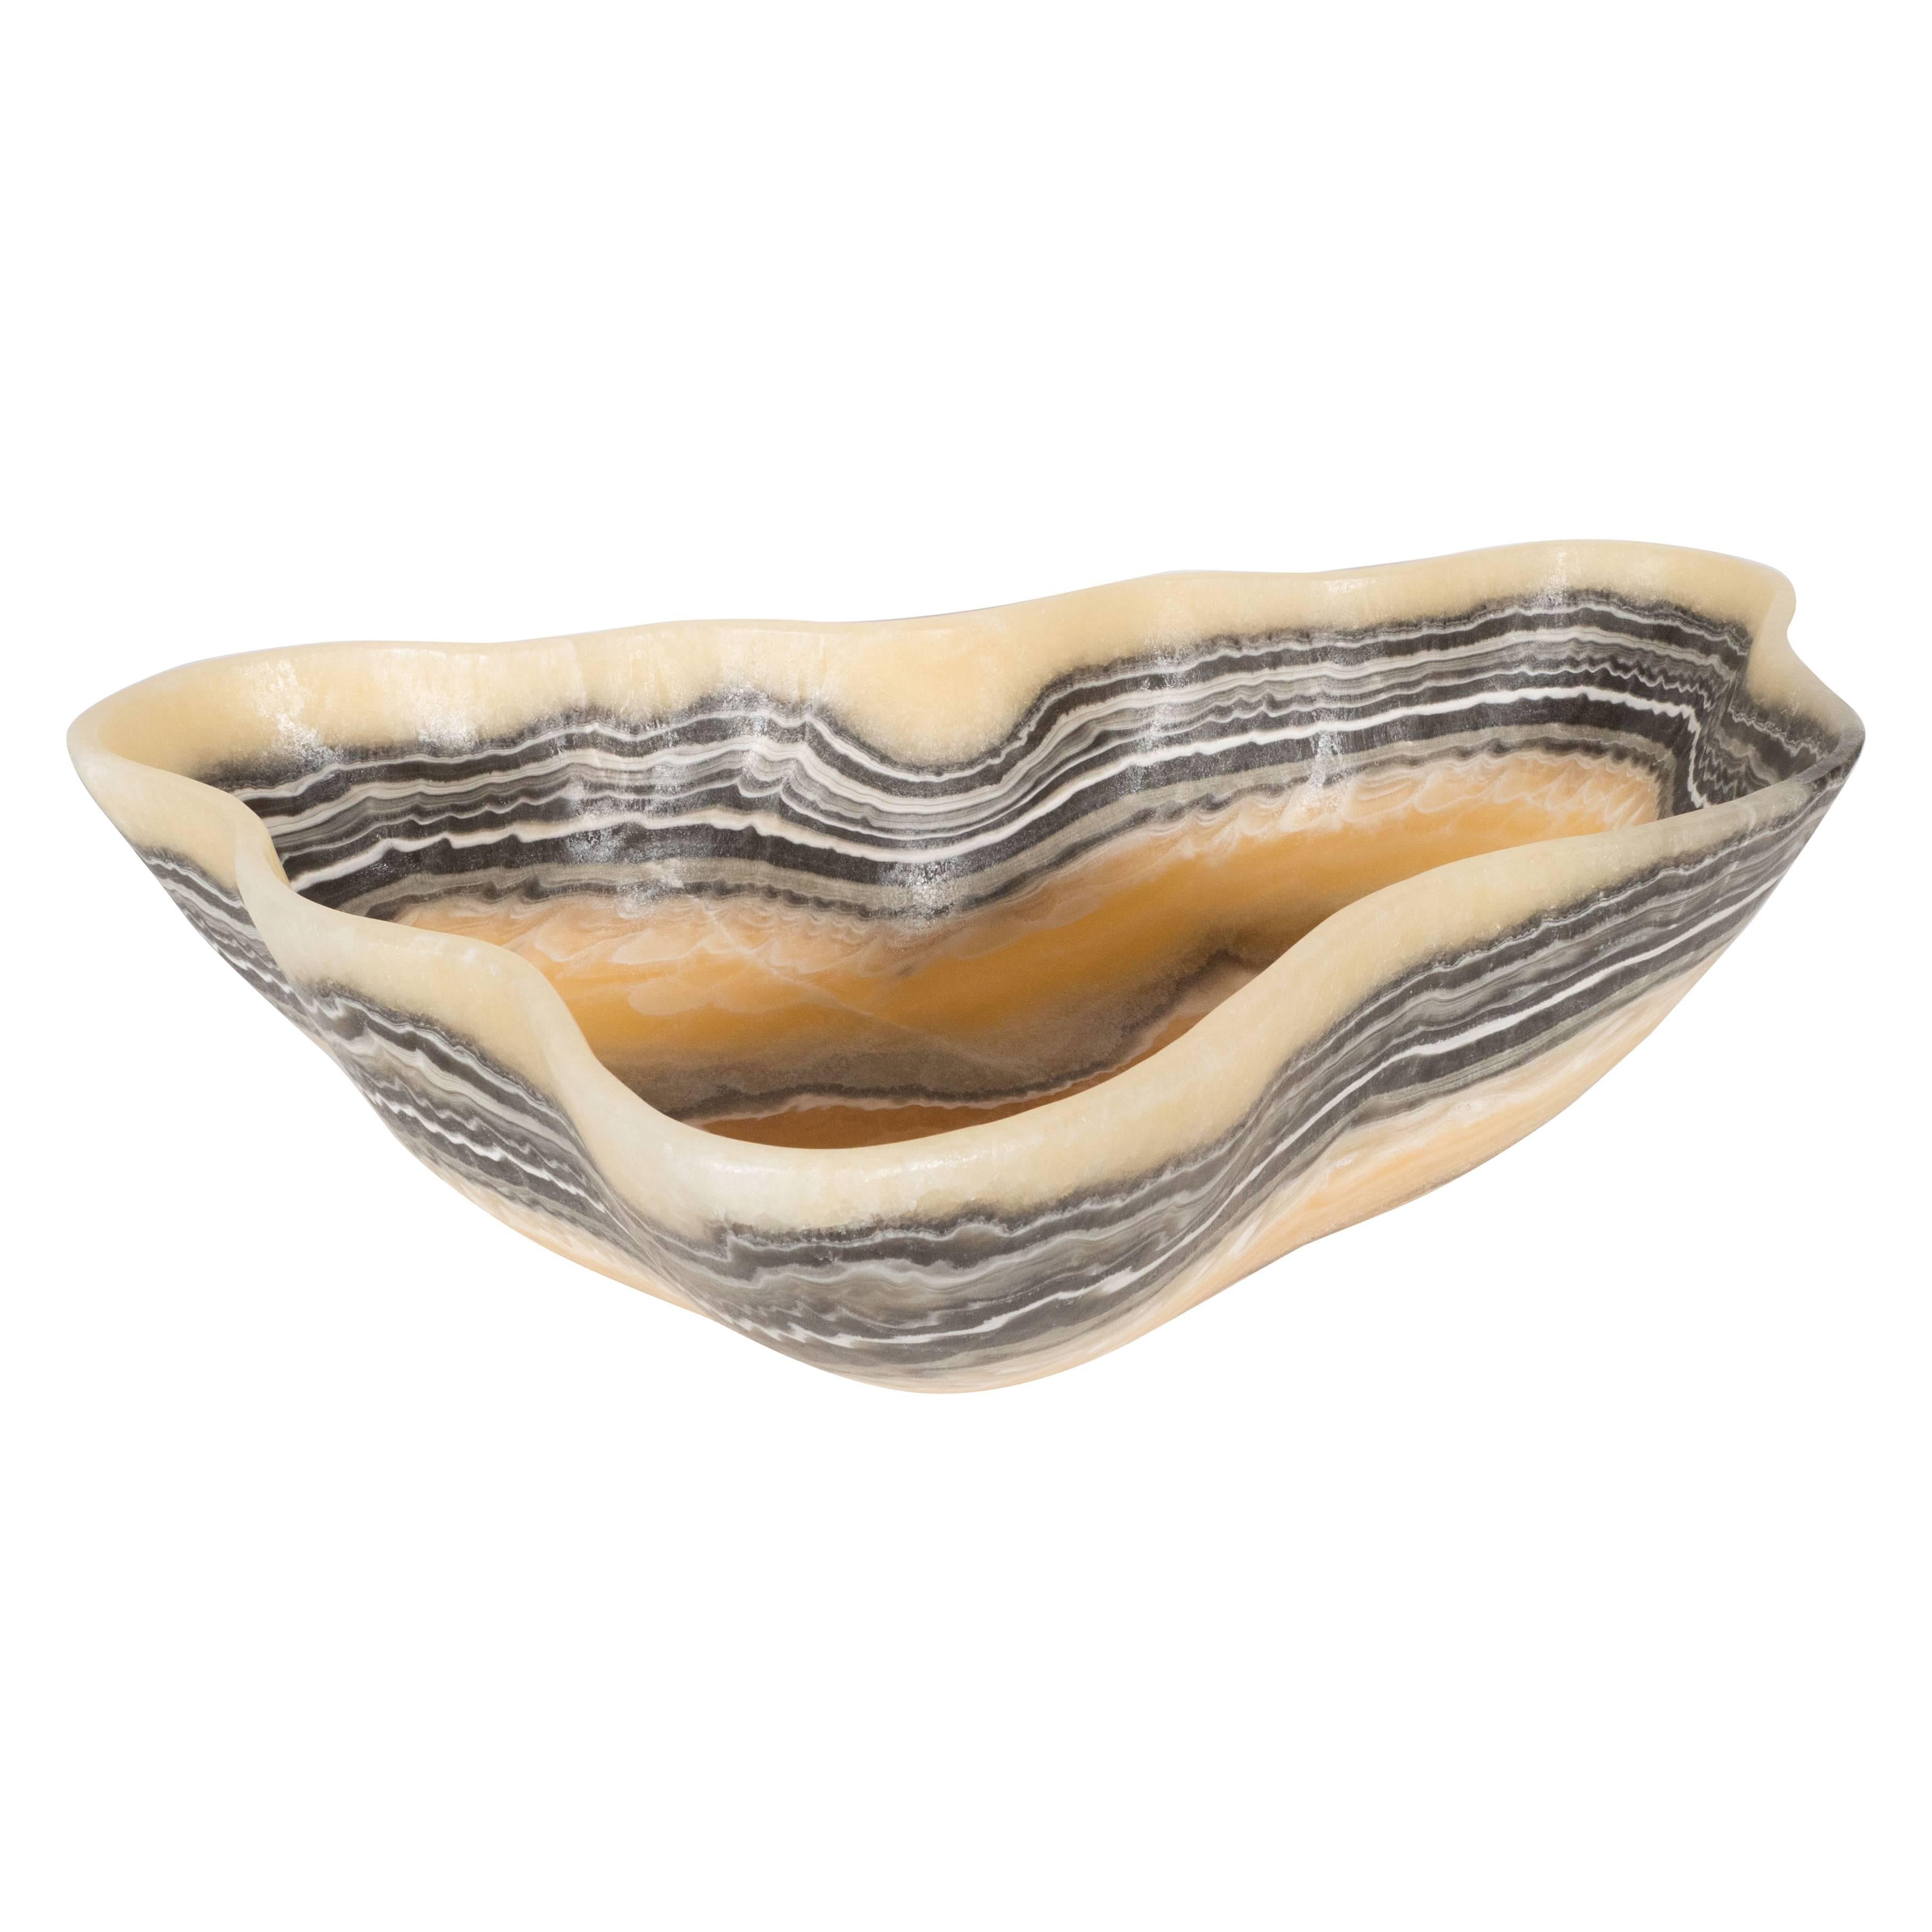 Sophisticated Organic Modern Agate Bowl in Grisaille and Honeyed Tones